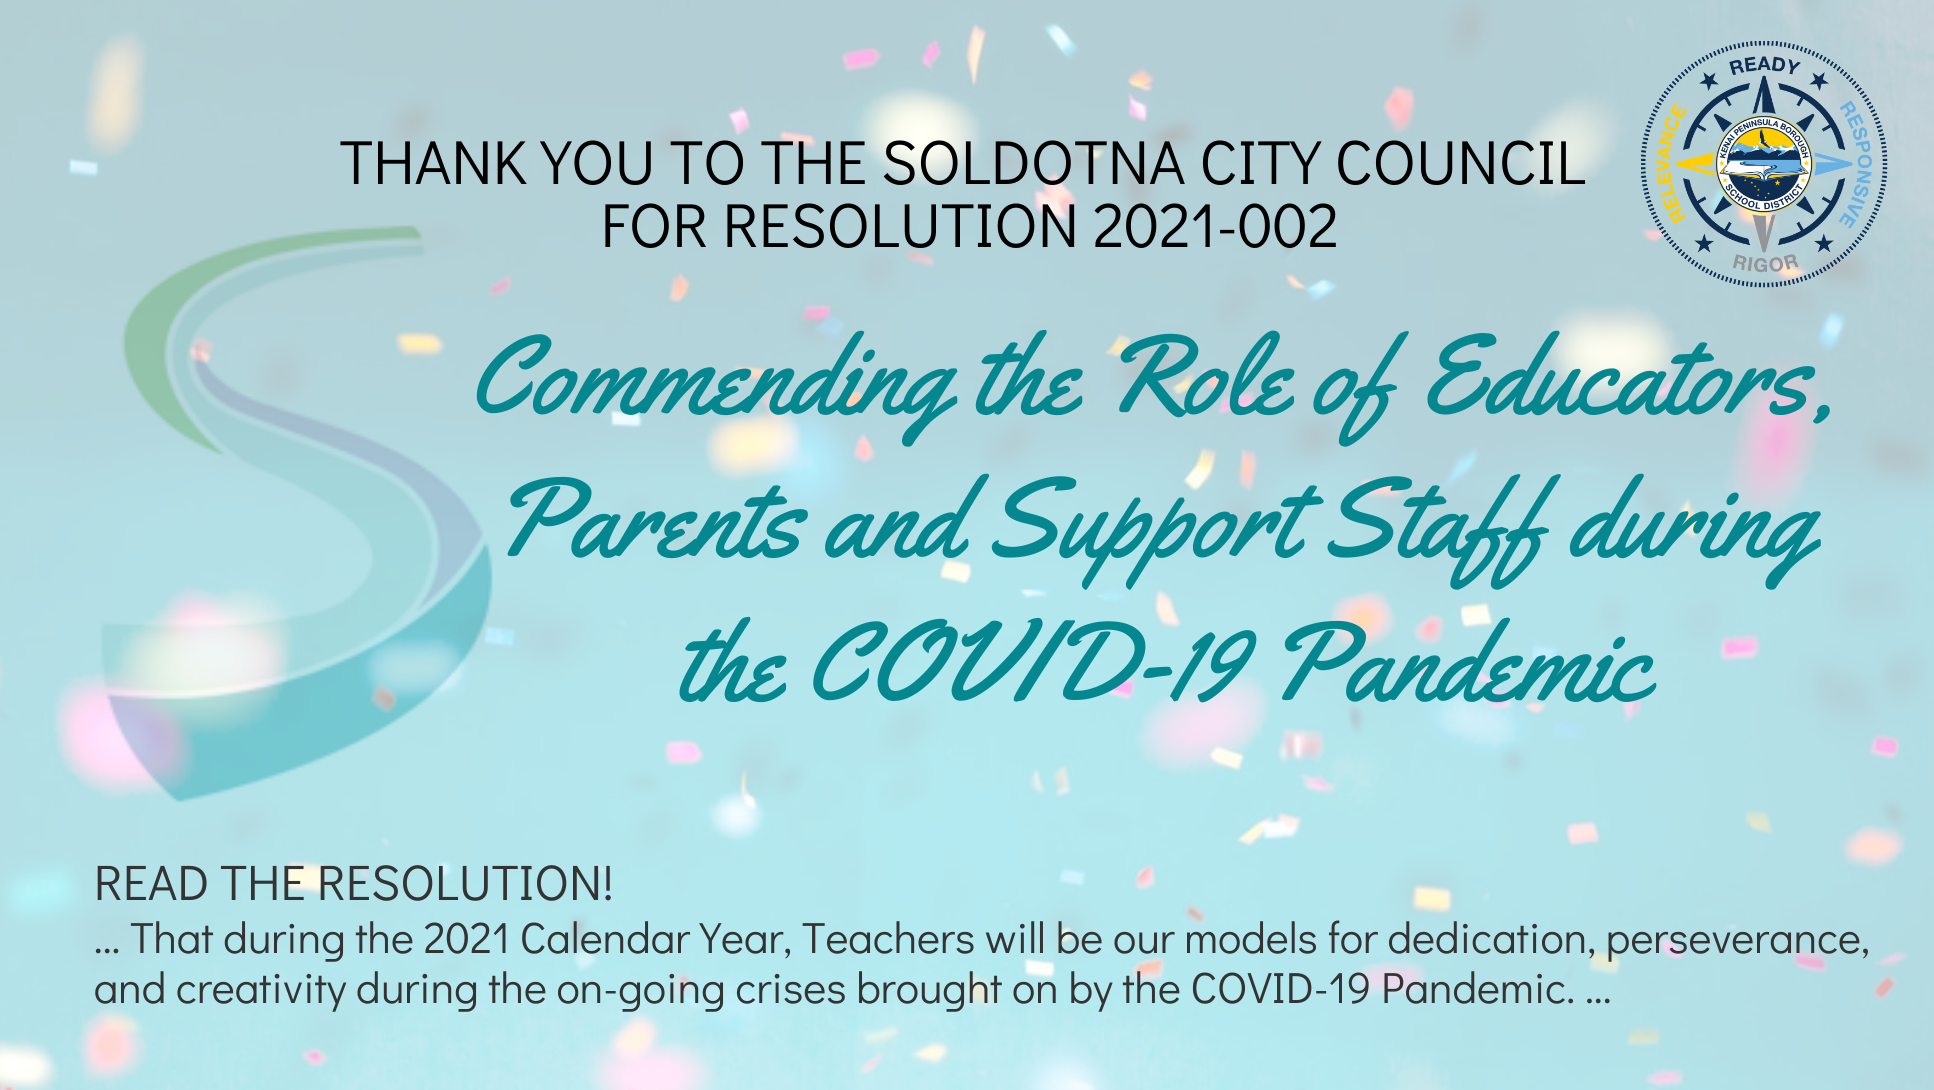 City of Soldotna commends role of educators, parents and support staff